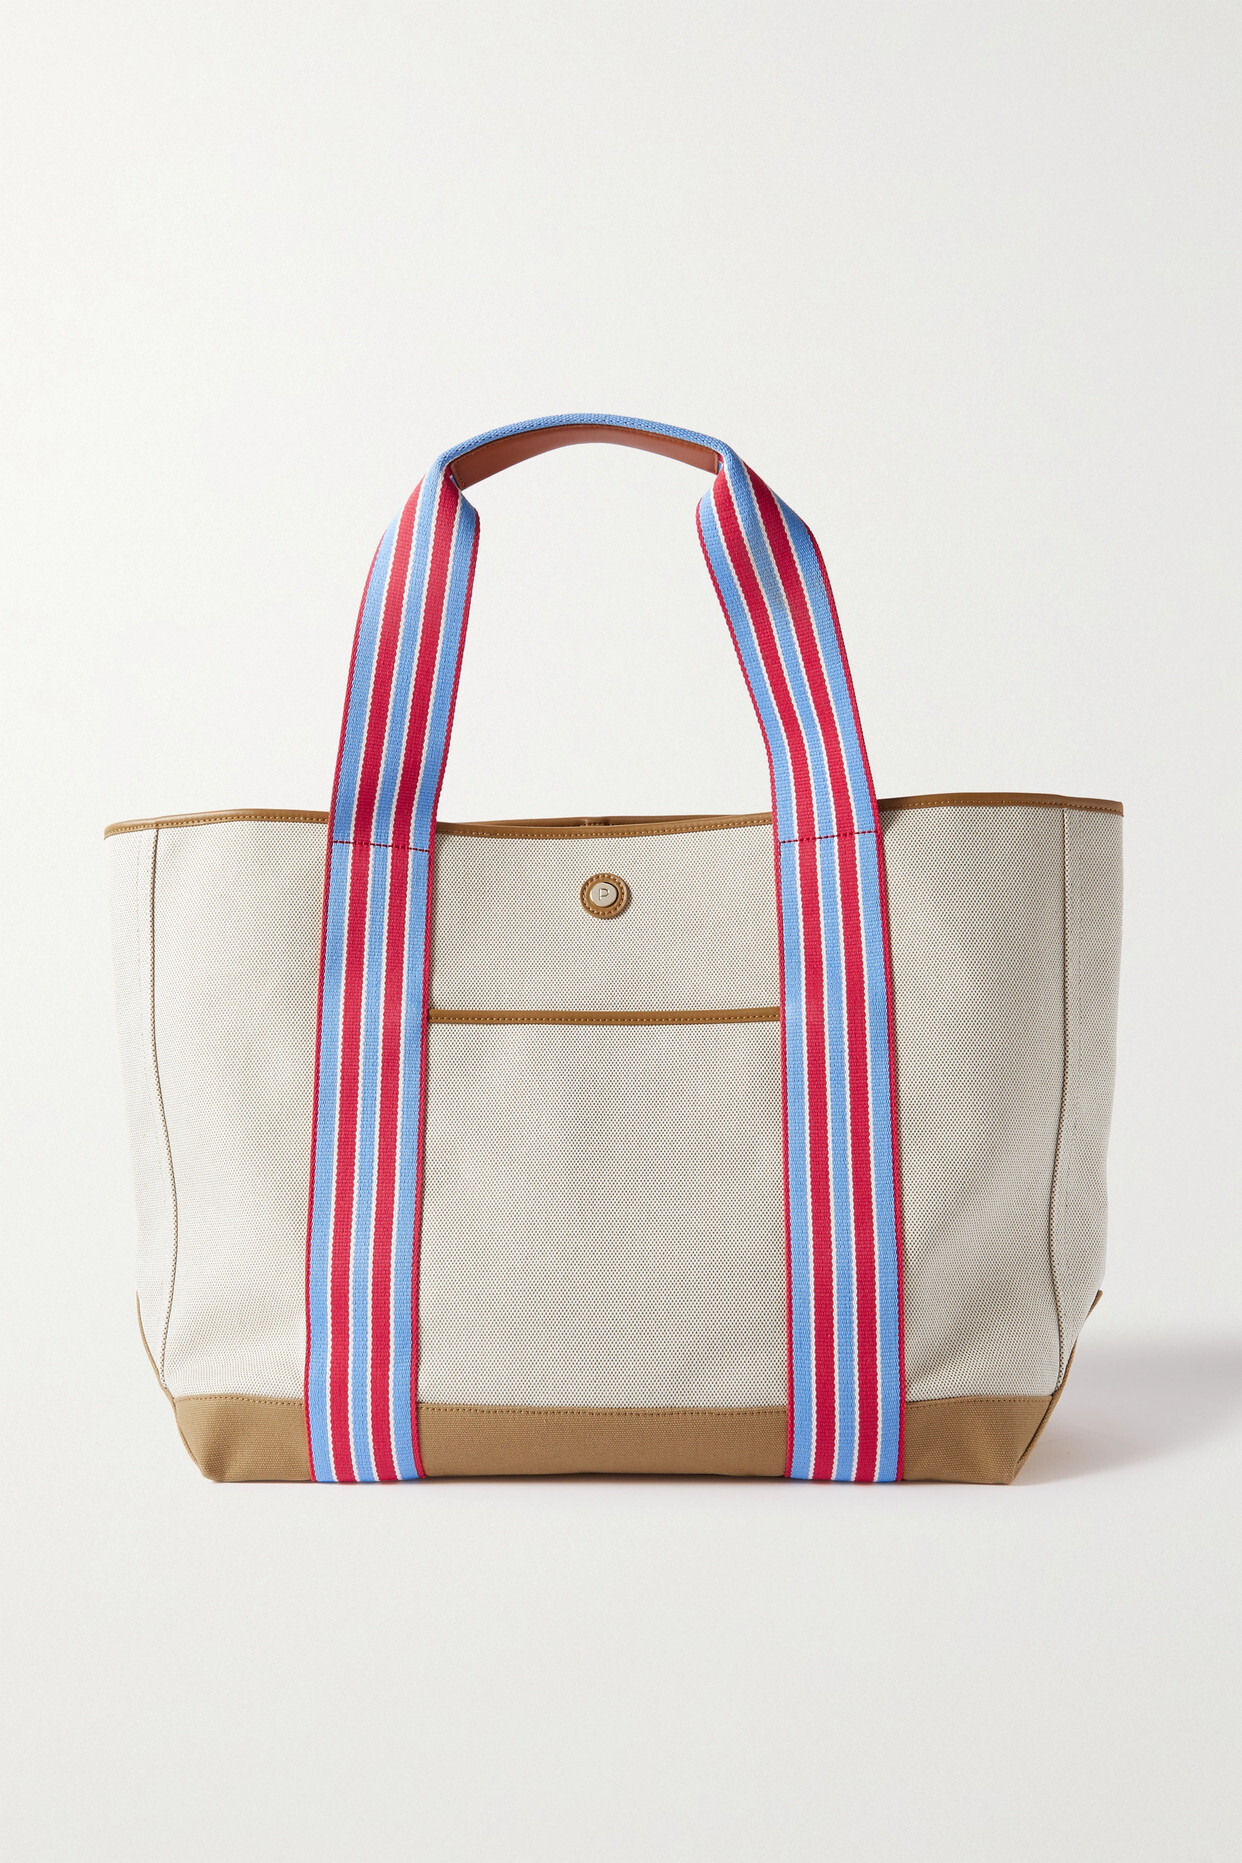 Paravel - + Net Sustain Cabana Leather And Canvas Tote - Neutrals